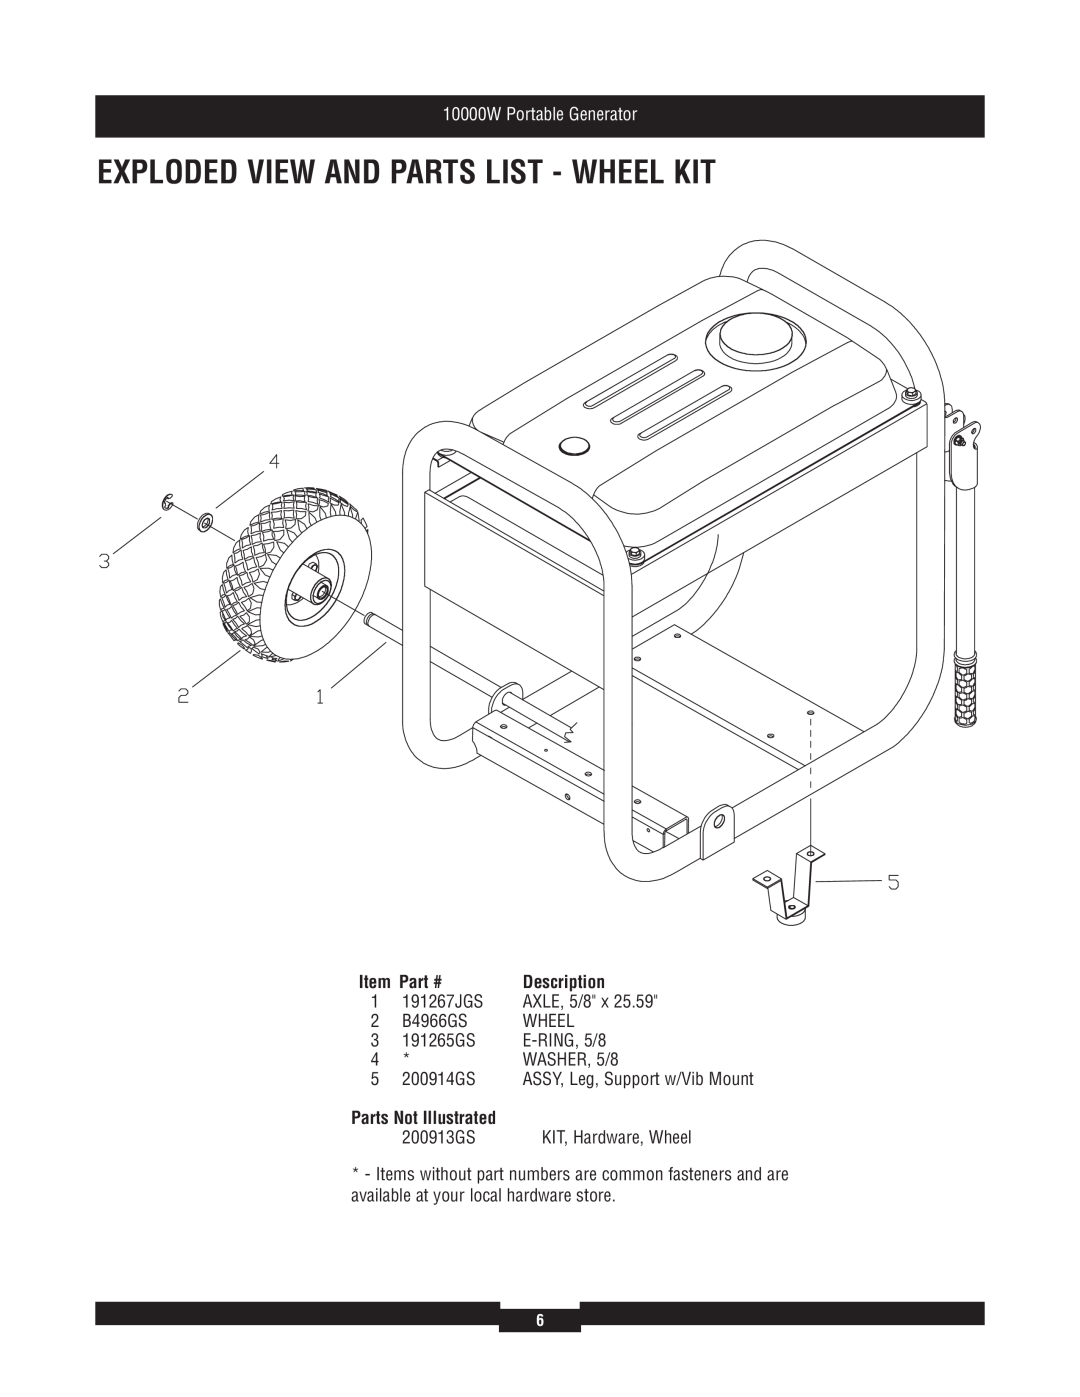 Briggs & Stratton 030384 manual Exploded View And Parts List - Wheel Kit, Parts Not Illustrated, 10000W Portable Generator 